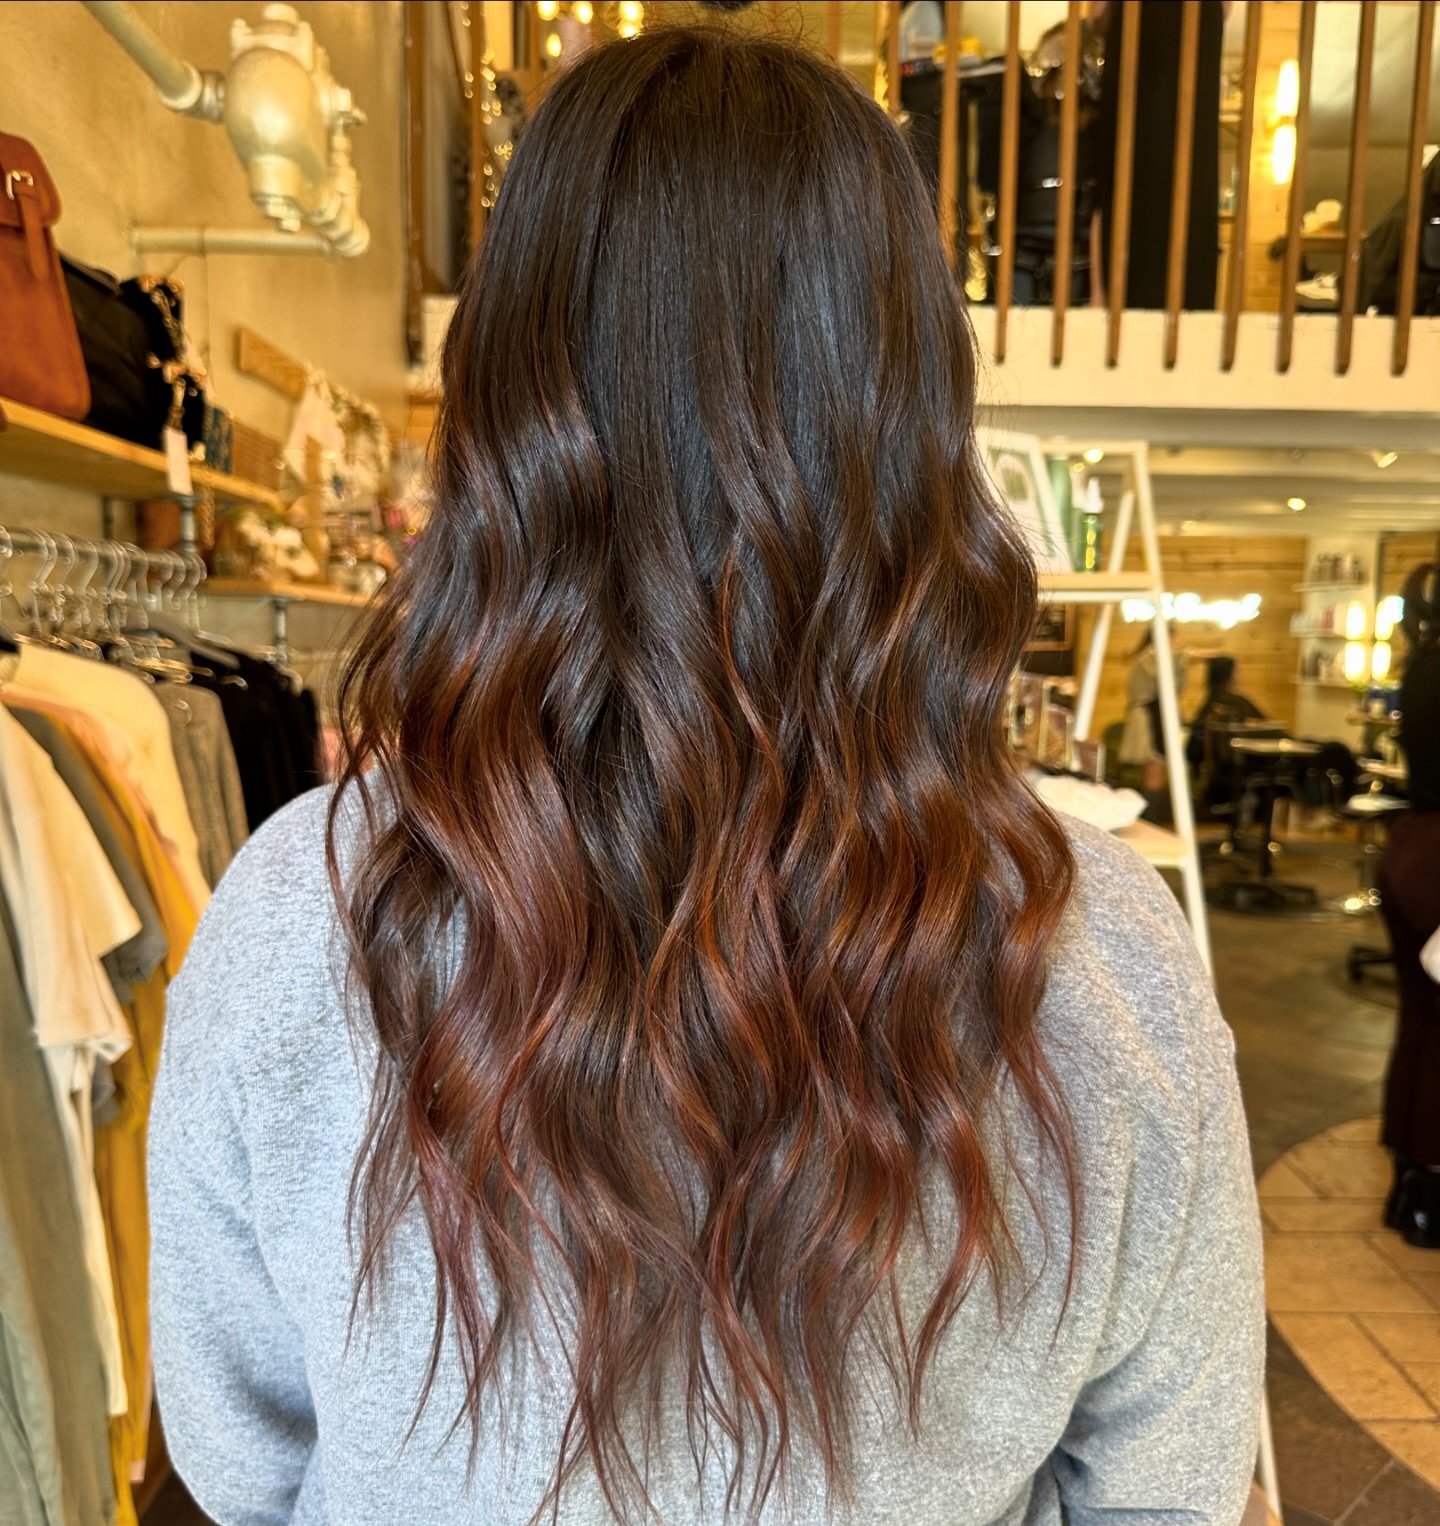 This copper by @hairbypaytongarcia is jaw dropping! 🧡
✽
✽
✽
✽
✽
Roots Beauty Studio 
115 Linden Street, Fort Collins 
970.484.2119
𝑪𝒂𝒍𝒍 𝒐𝒓 𝒈𝒐 𝒐𝒏𝒍𝒊𝒏𝒆 𝒕𝒐 𝒃𝒐𝒐𝒌 𝒂𝒏 𝒂𝒑𝒑𝒐𝒊𝓷𝒕𝒎𝒆𝒏𝒕